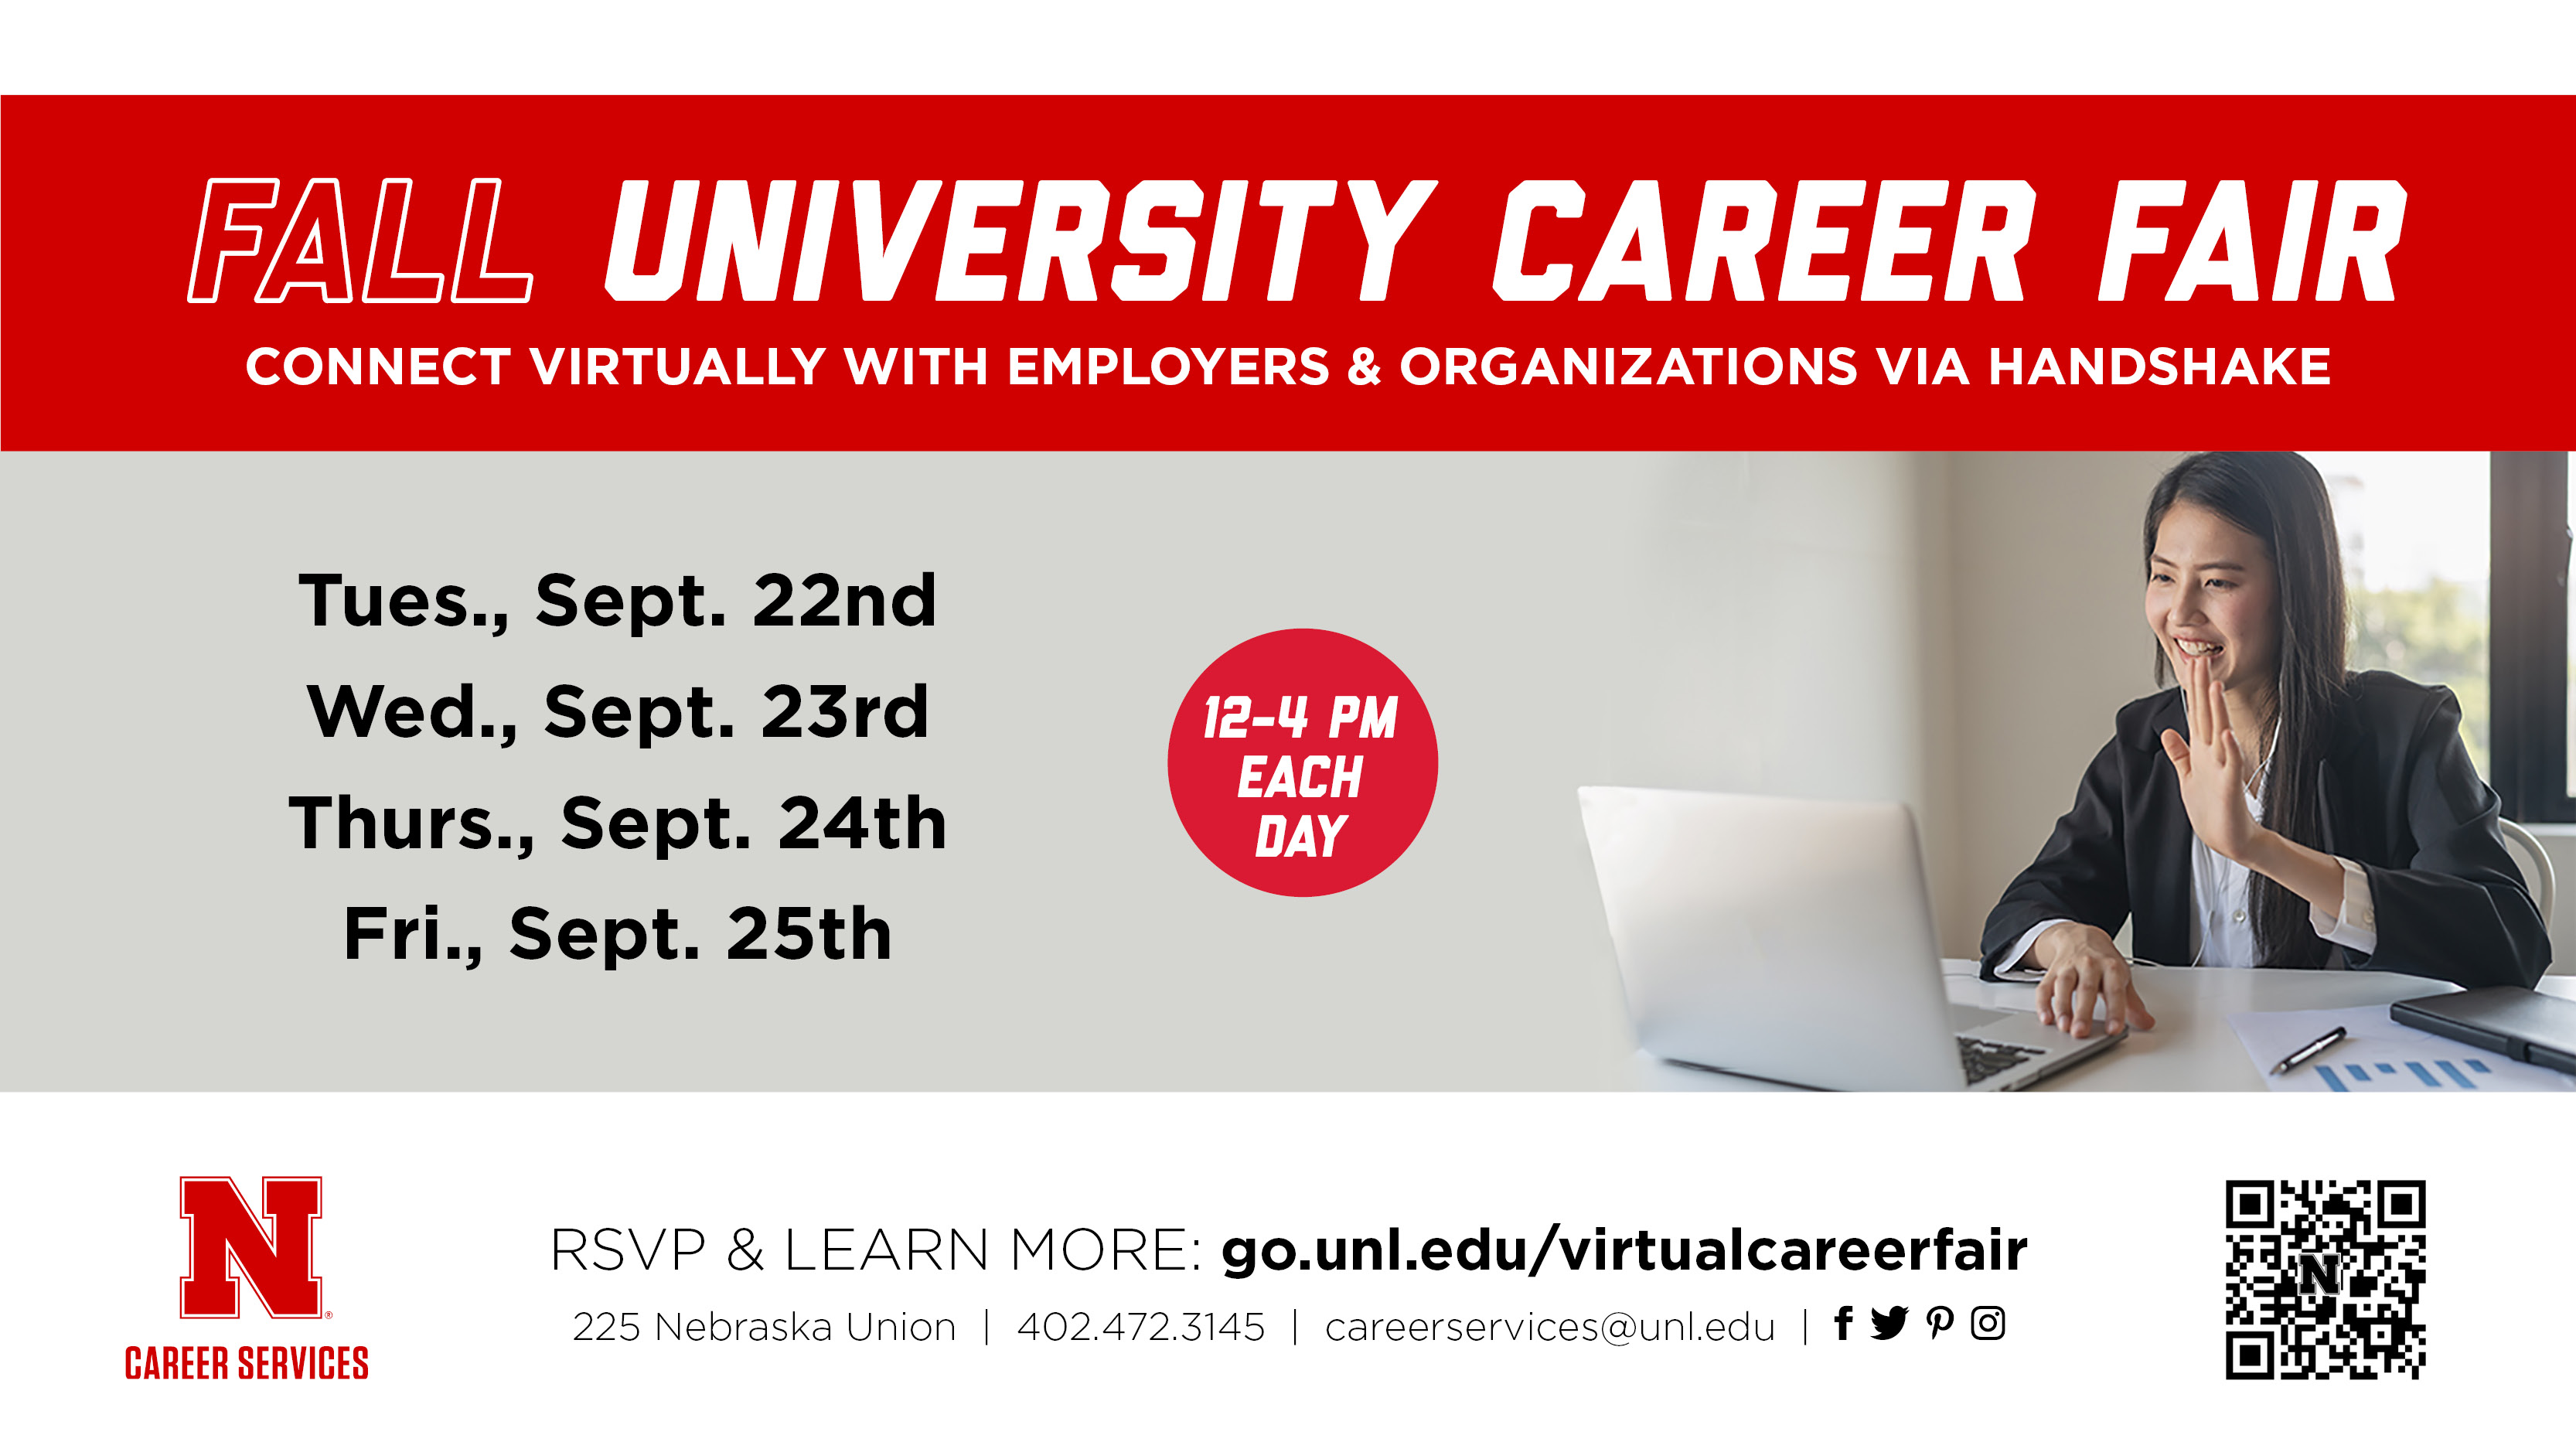 Registration is now open for the virtual Career Fair.